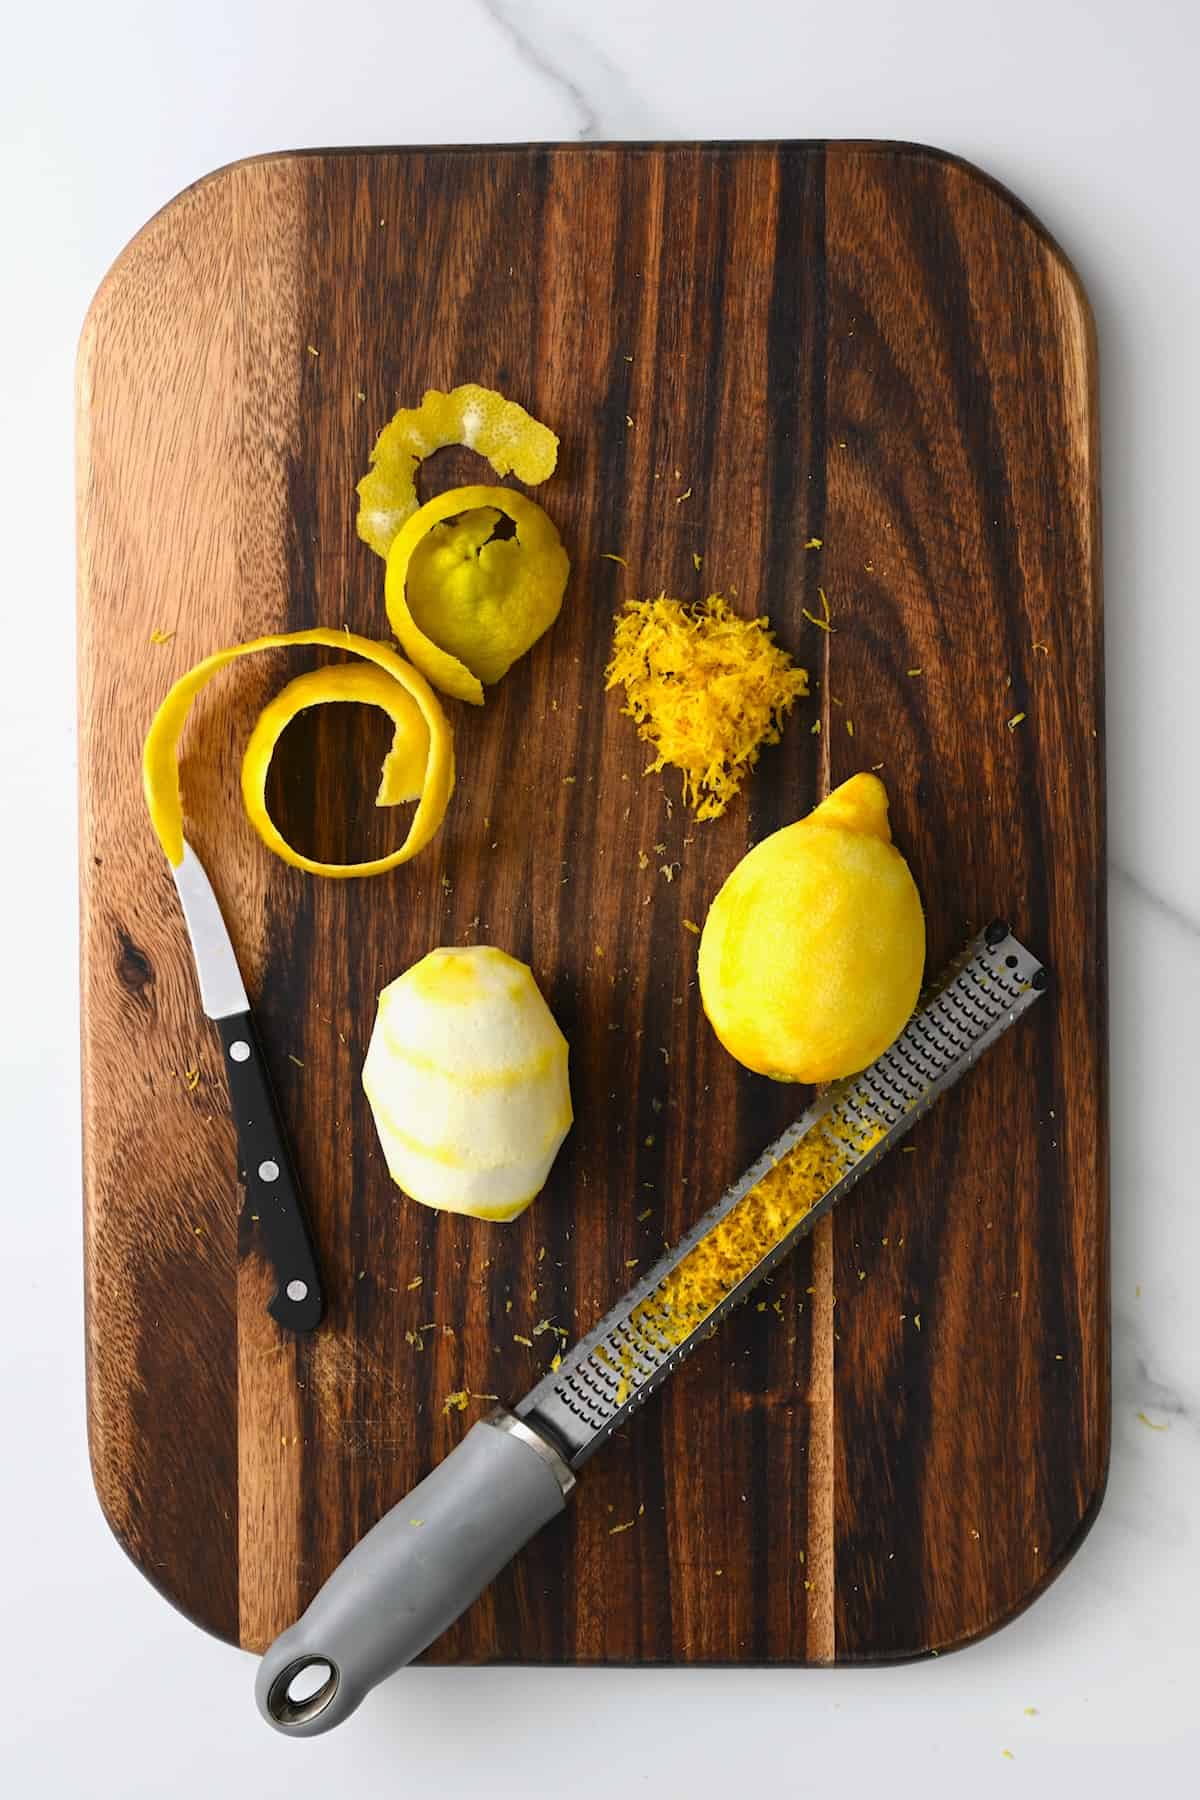 One peeled lemon with a knife and one zested lemon with a microplane